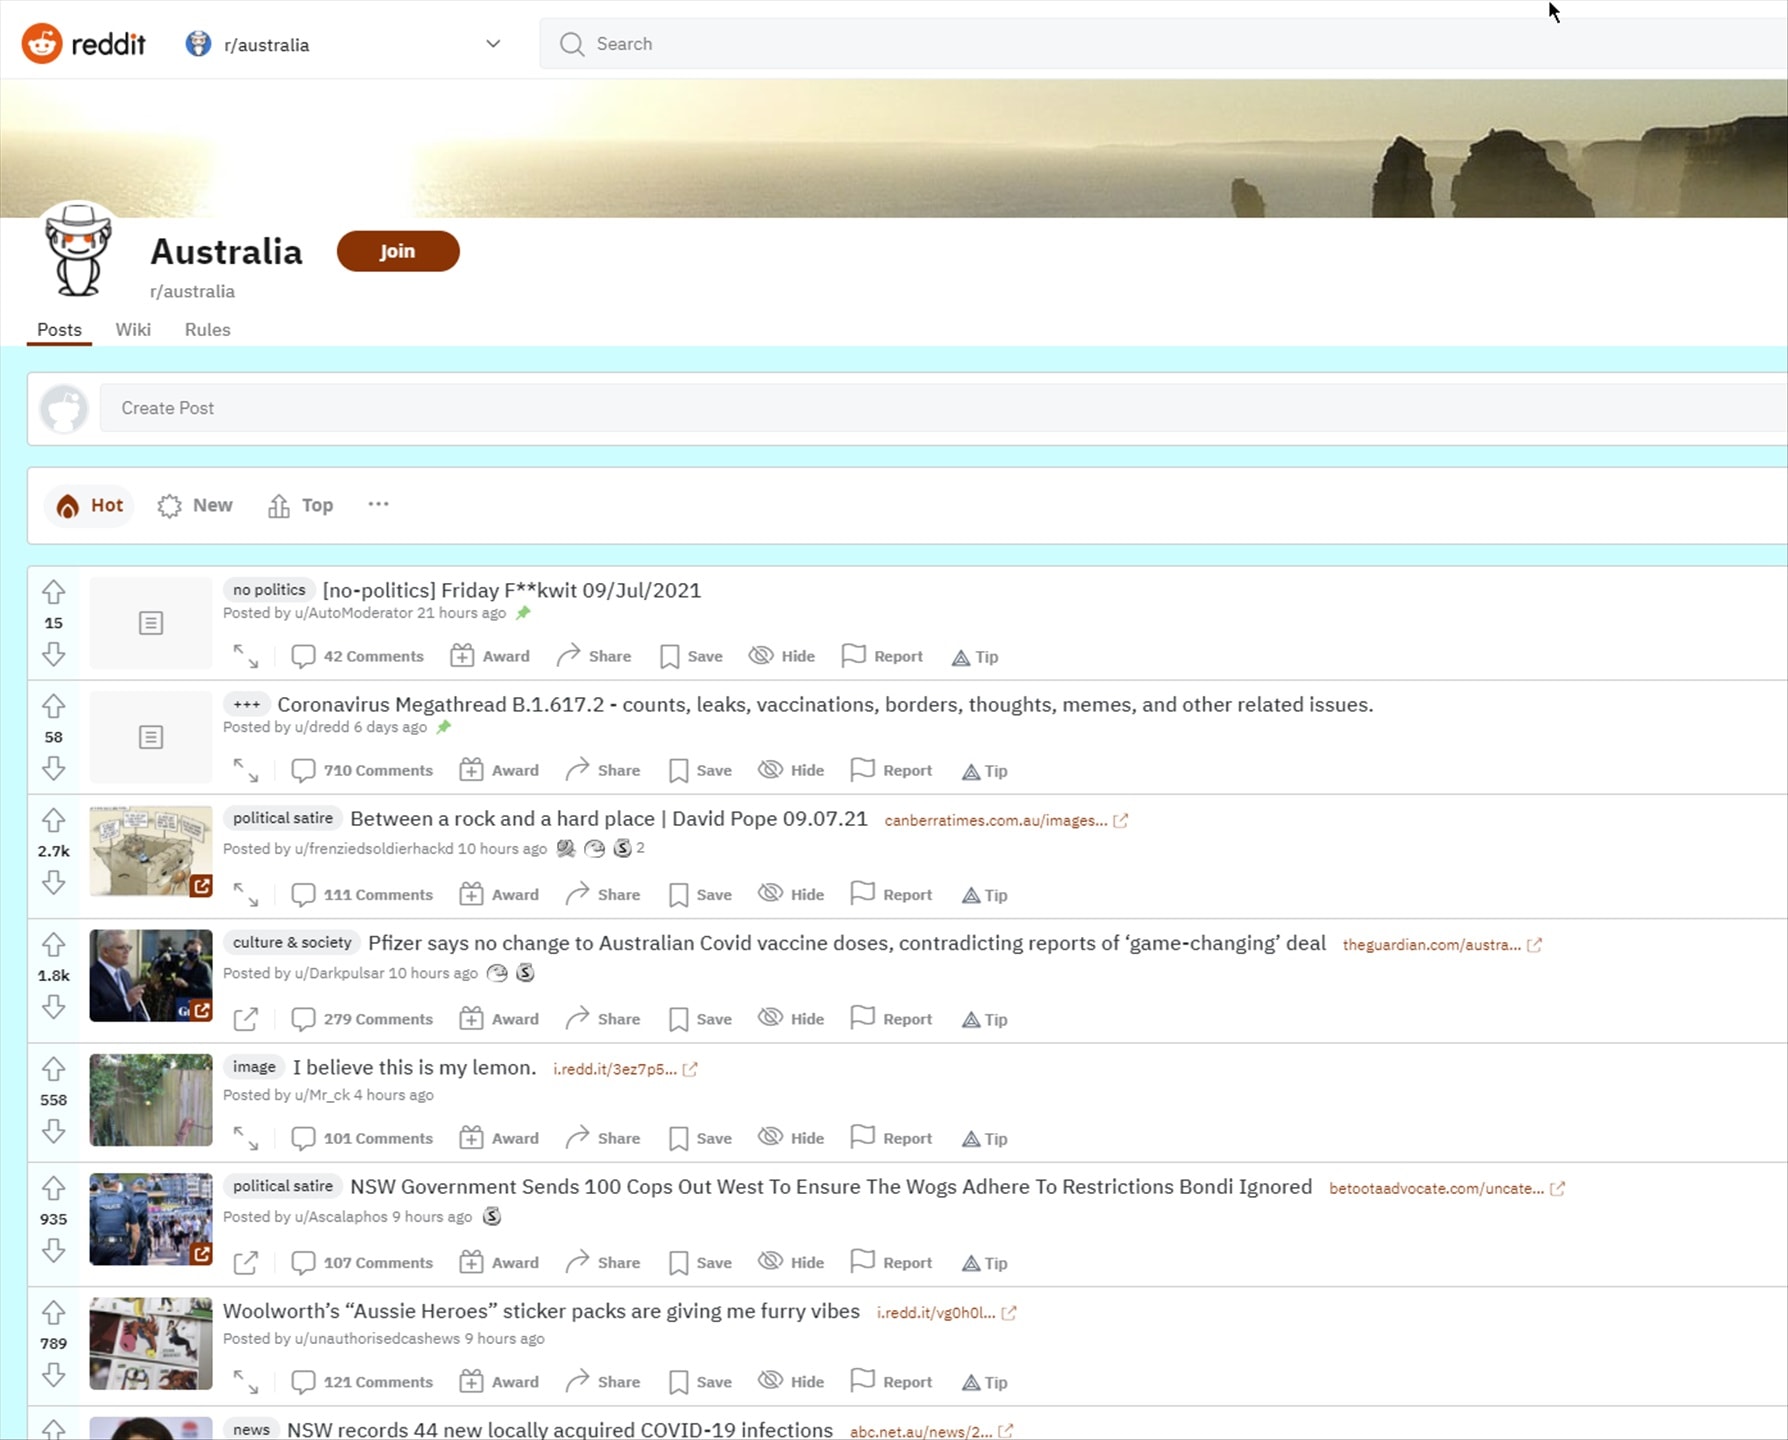 Reddit is opening a local office here in Australia, the first in Southern Hemisphere